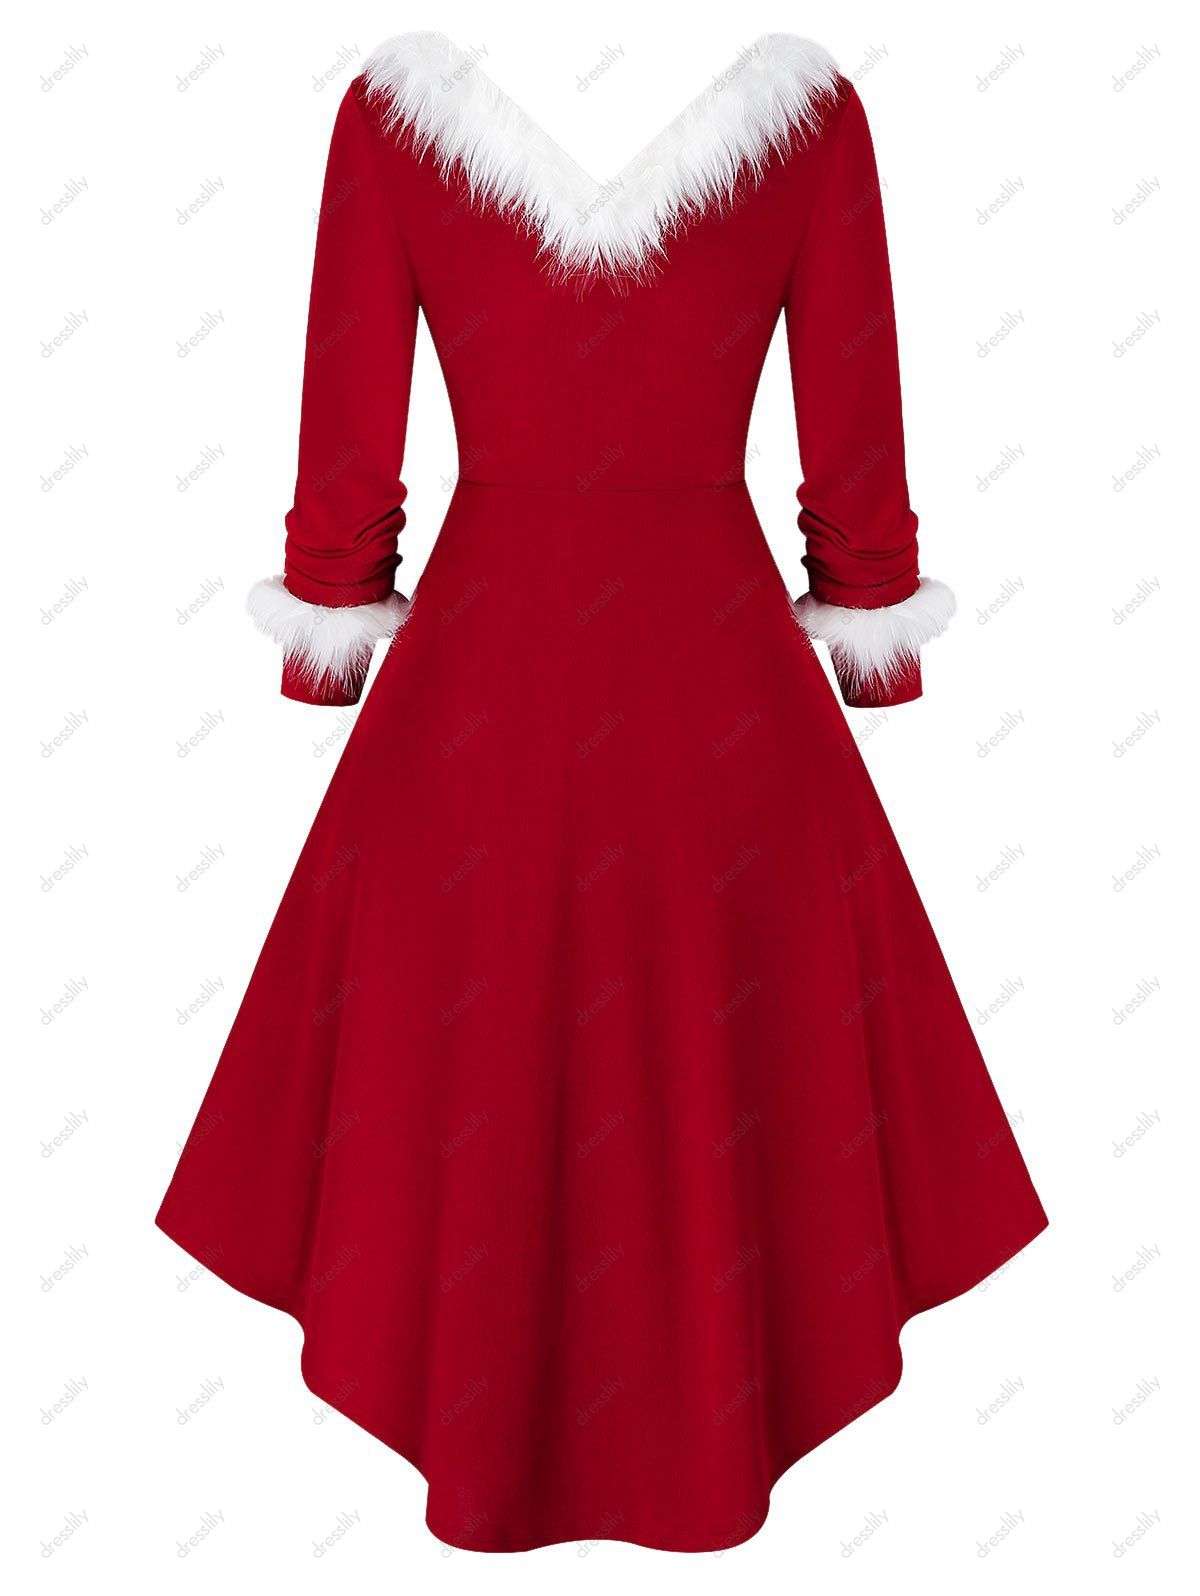 red knit dress with sleeves